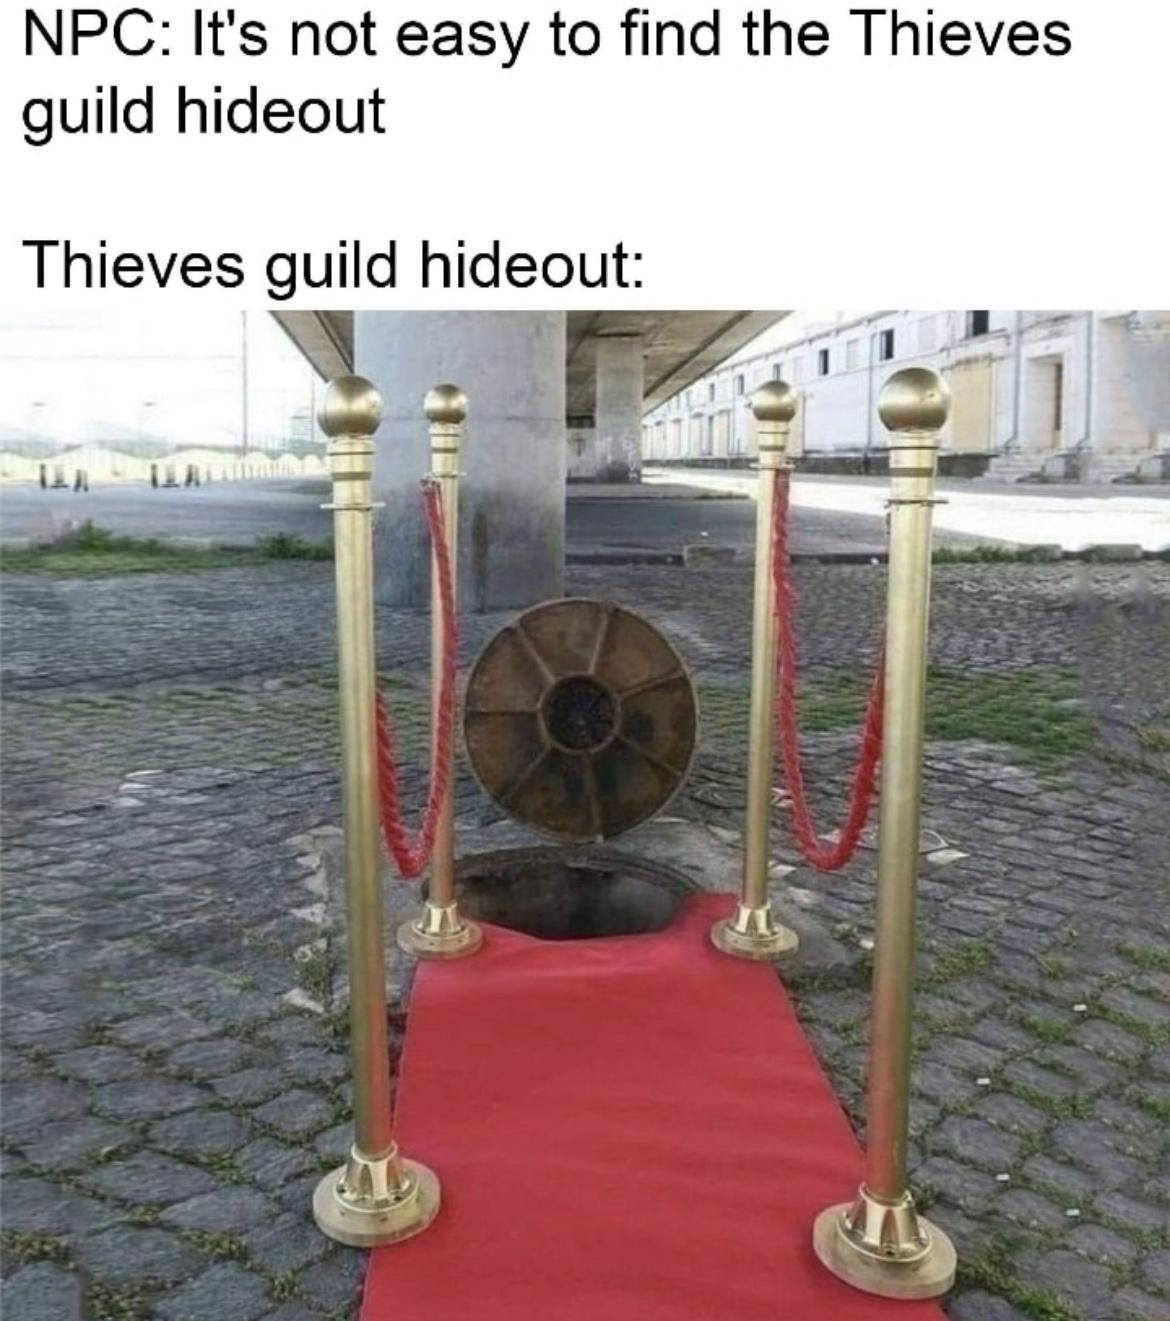 Thieves' guild - Npc It's not easy to find the Thieves guild hideout Thieves guild hideout